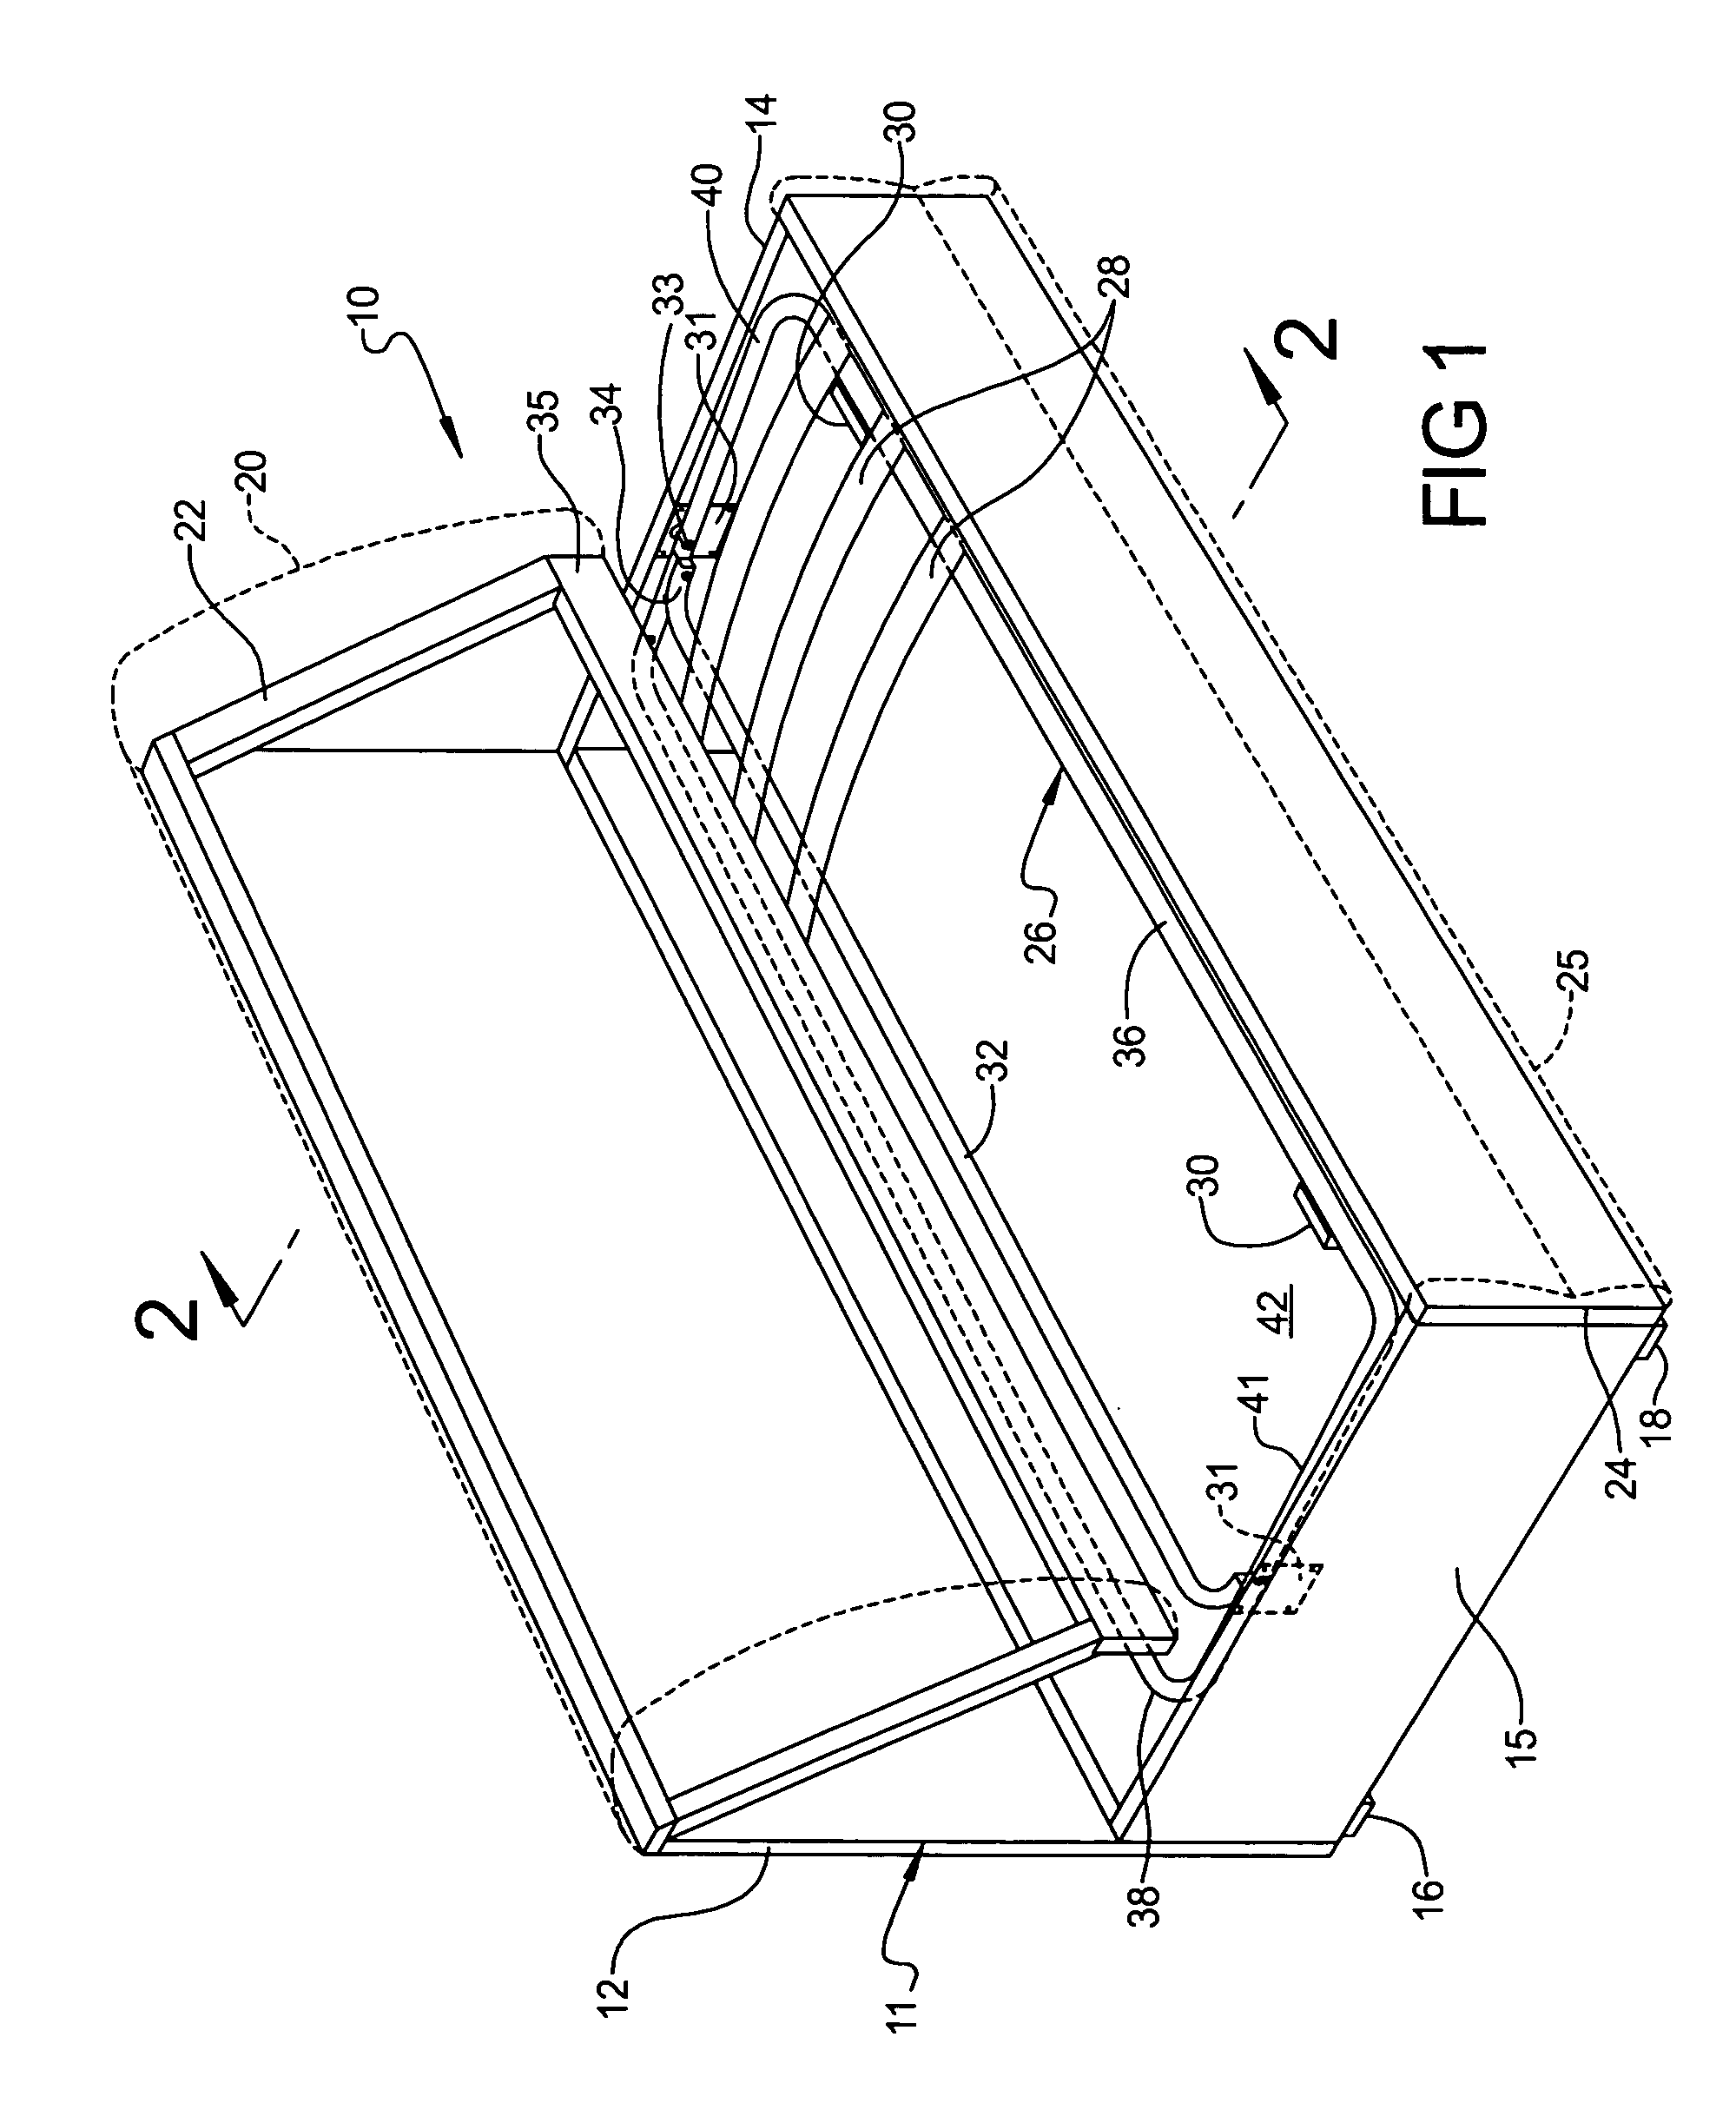 Access and support system for convertible furniture